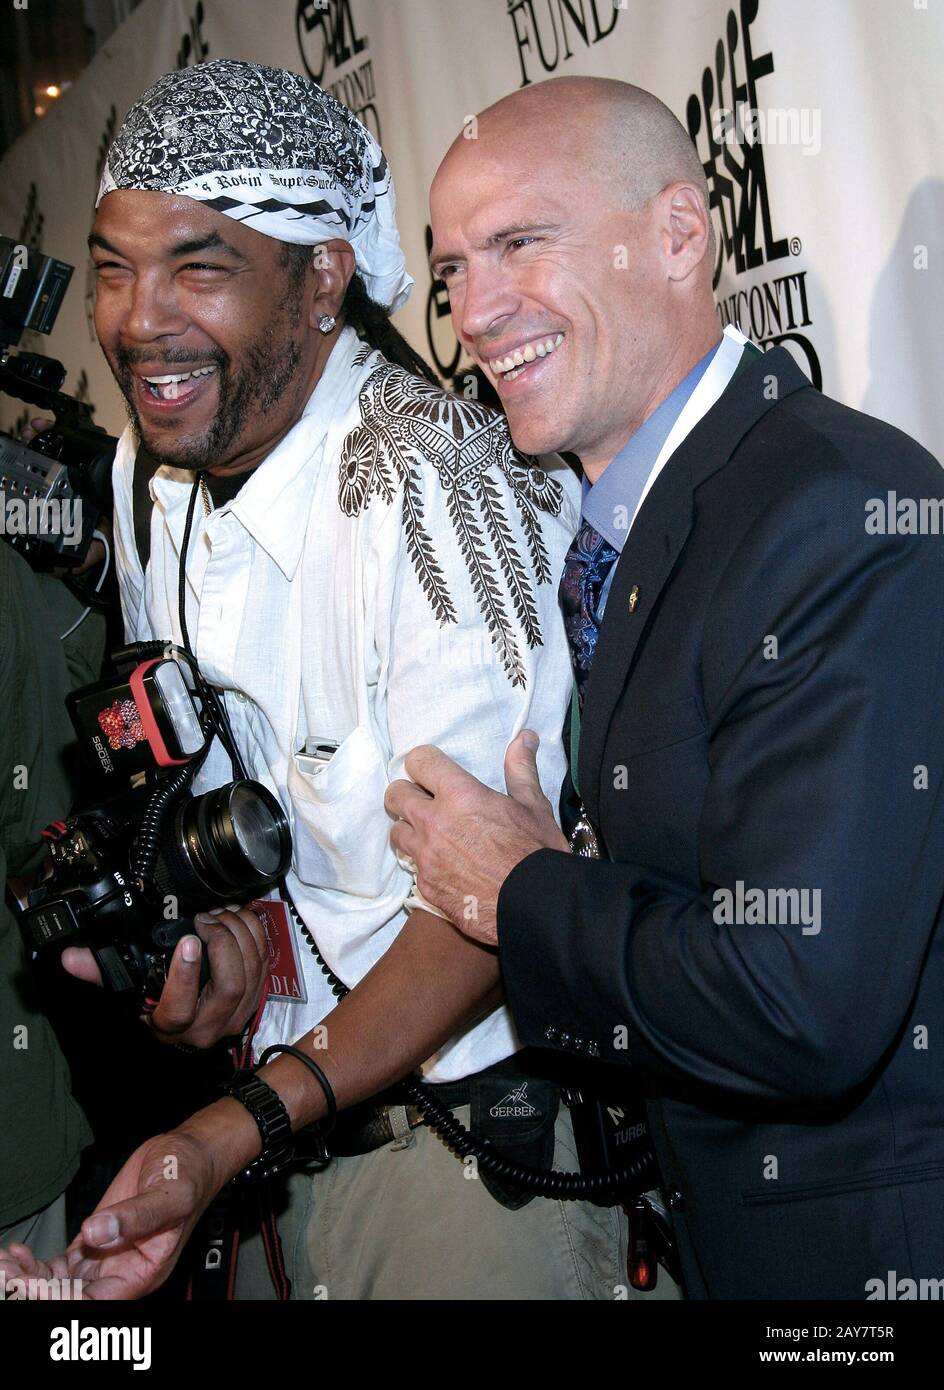 New York, NY, USA. 17 September, 2007. Celebrity Photographer, Phillippe Noisette, Mark Messier at the 22nd Annual Sports Legends Dinner to benefit The Buoniconti Fund to Cure Paralysis at Waldorf=Astoria. Credit: Steve Mack/Alamy Stock Photo